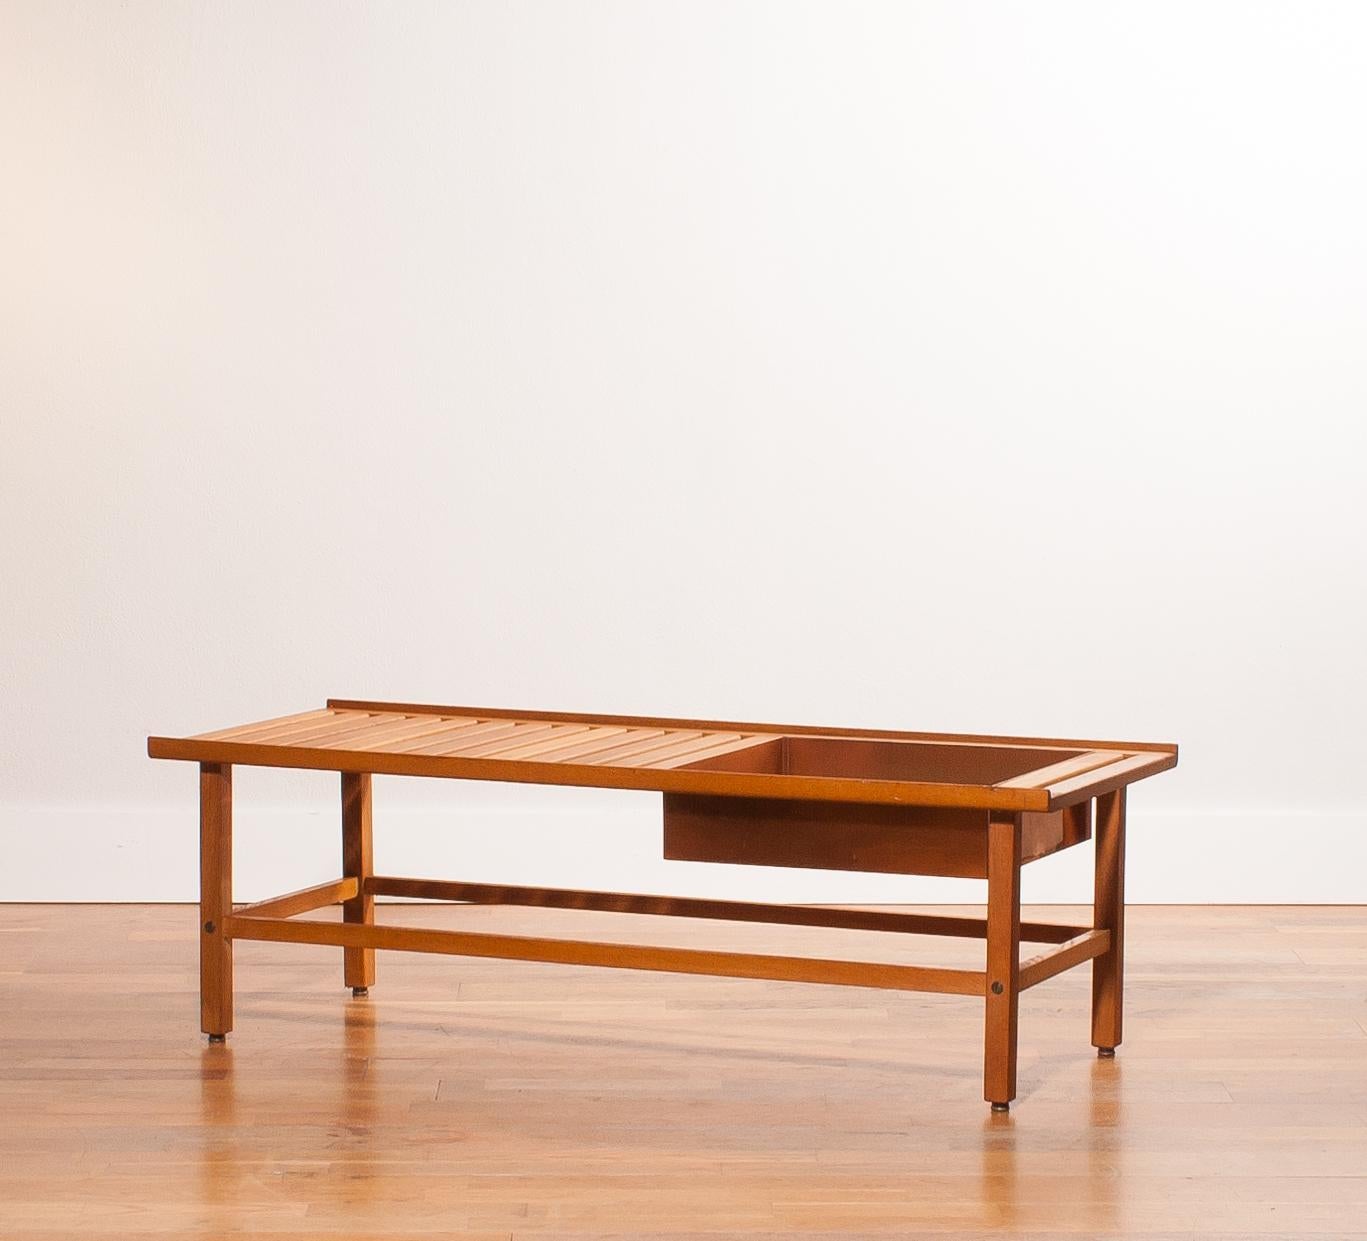 A beautiful plant bench designed by Yngve Ekström.
The bench is made of teak.
There is room for plants of flowers in the copper compartment.
It is in excellent condition.
Period 1950s.
Dimensions: H 39 cm, D 48 cm, W 120 cm.